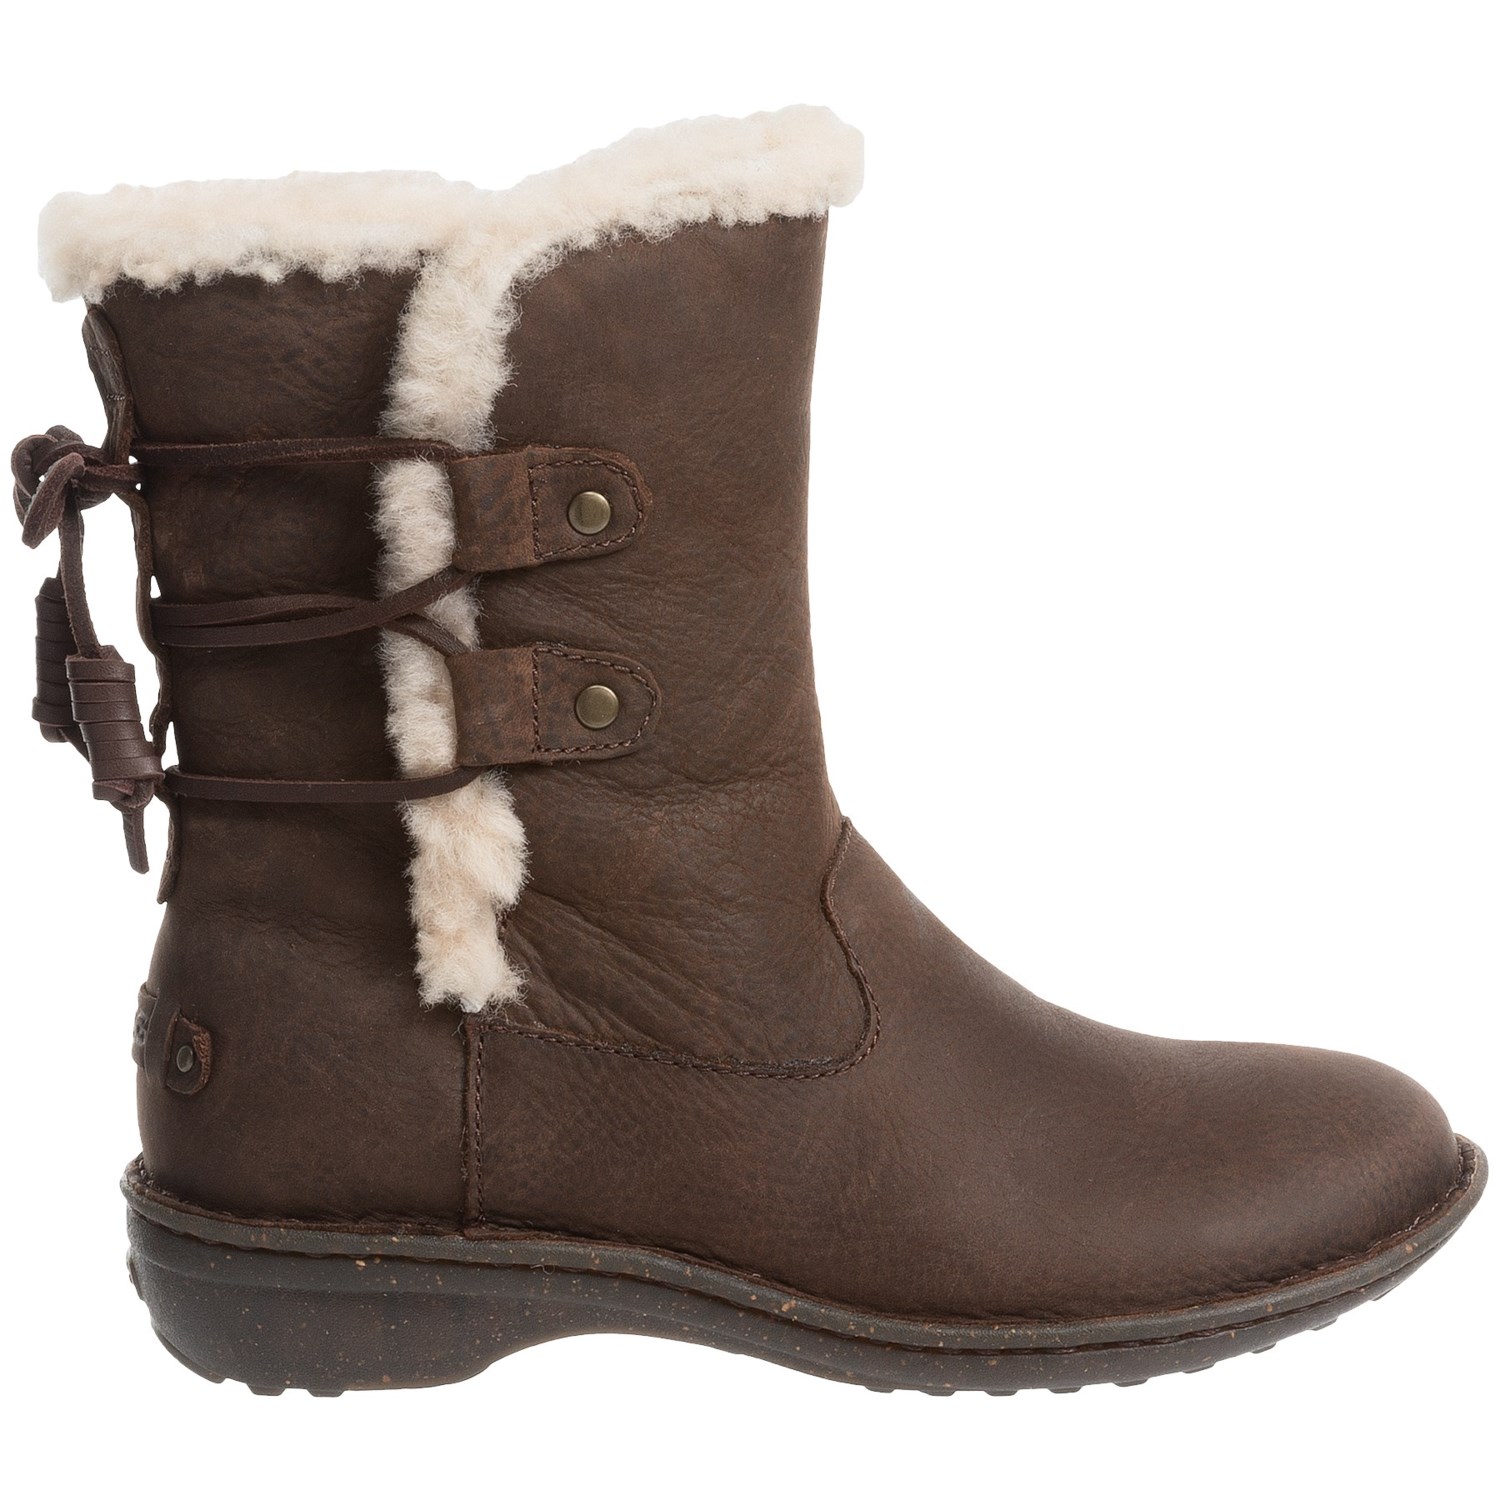 Sales Ugg Roxy Short Boots 5828 Store | Division of Global Affairs